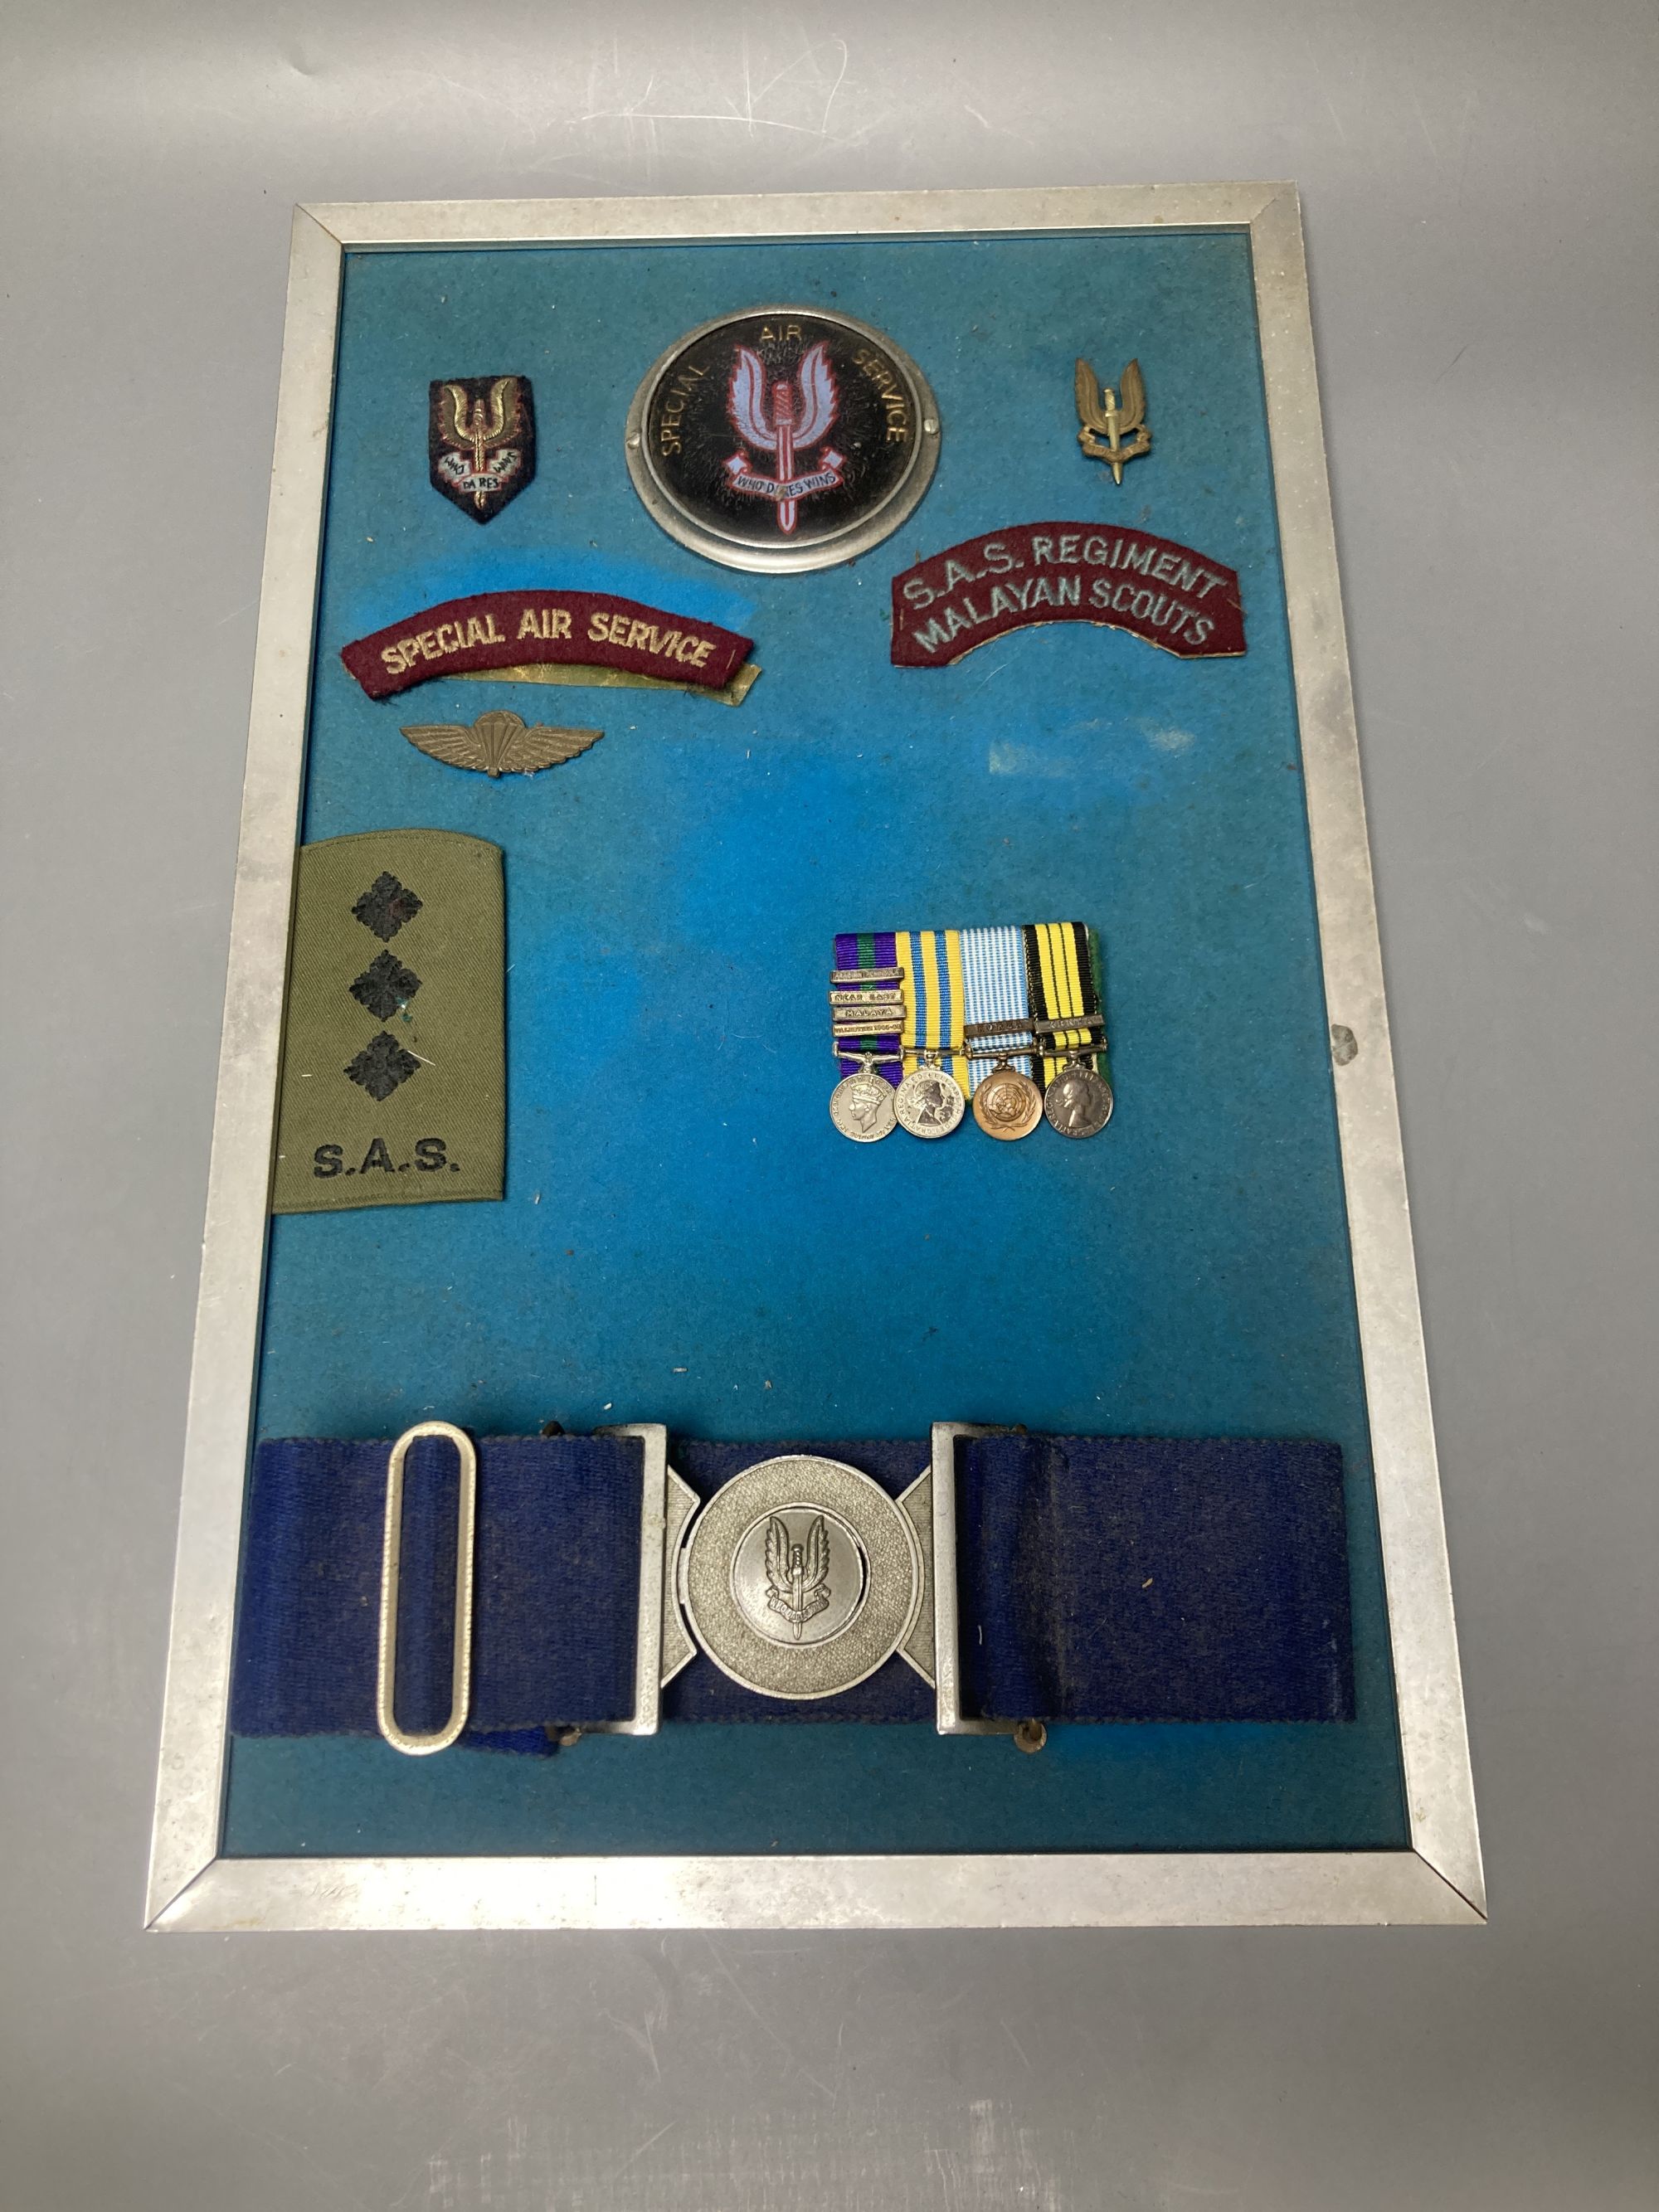 A group of Special Air Service SAS embroidered insignia, a belt and other military items, includes a Malayan Scouts insignia and a group of unnamed miniatures